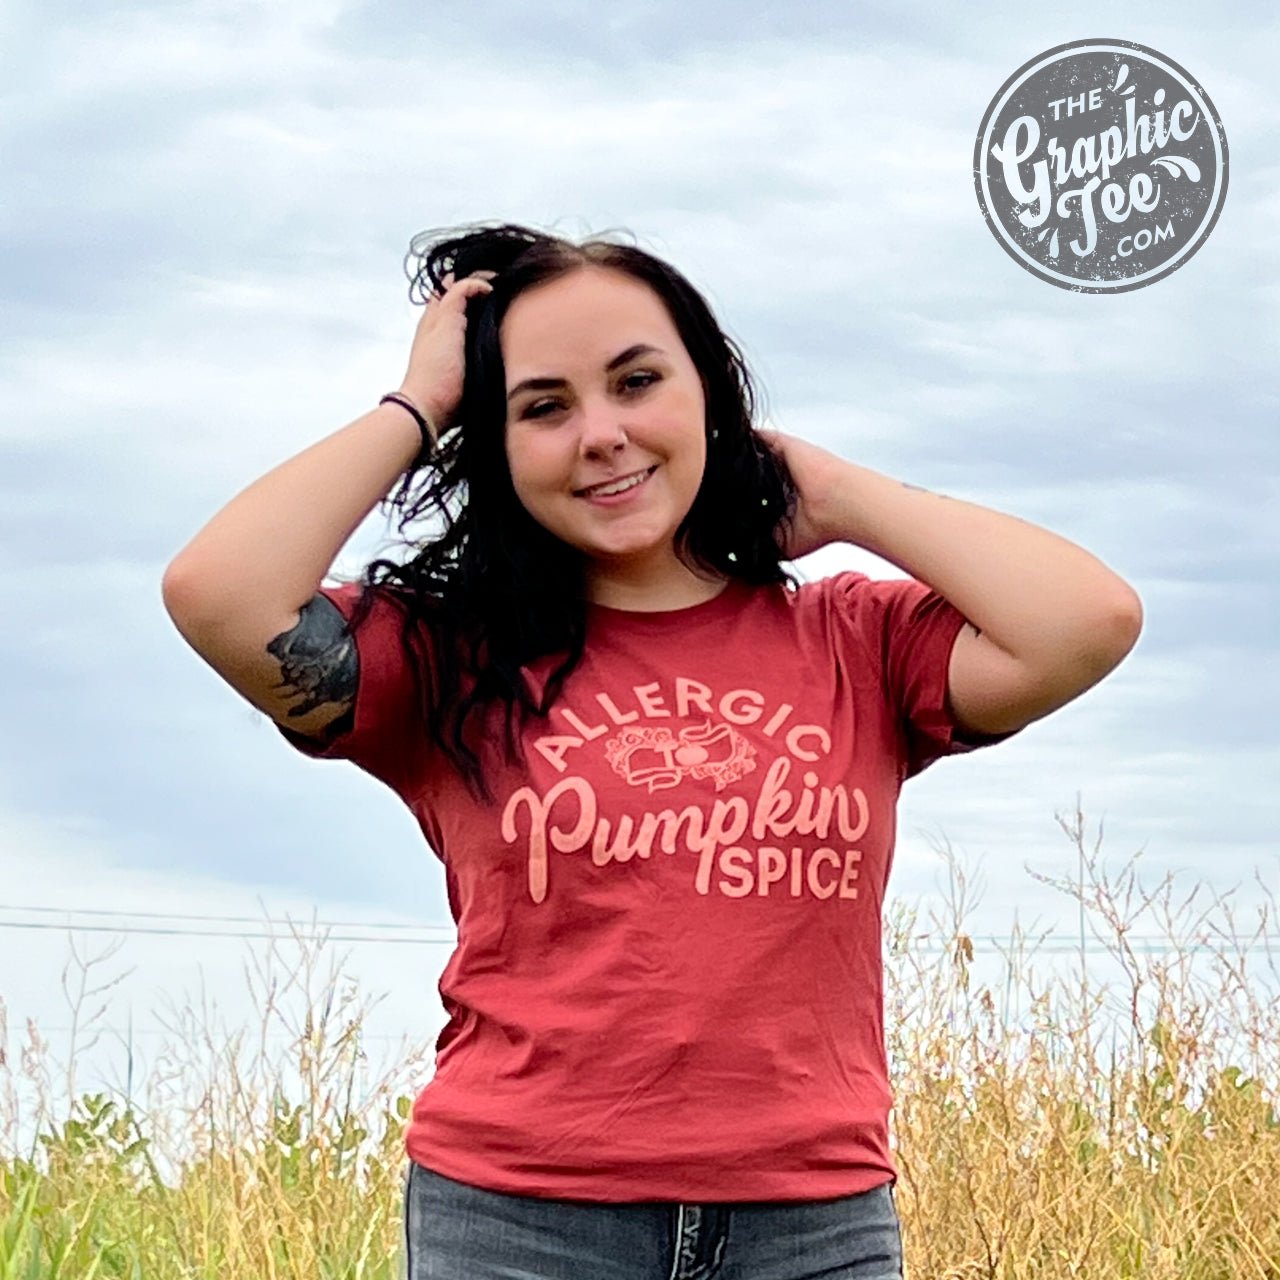 Allergic to Pumpkin Spice Short Sleeve Tee - The Graphic Tee